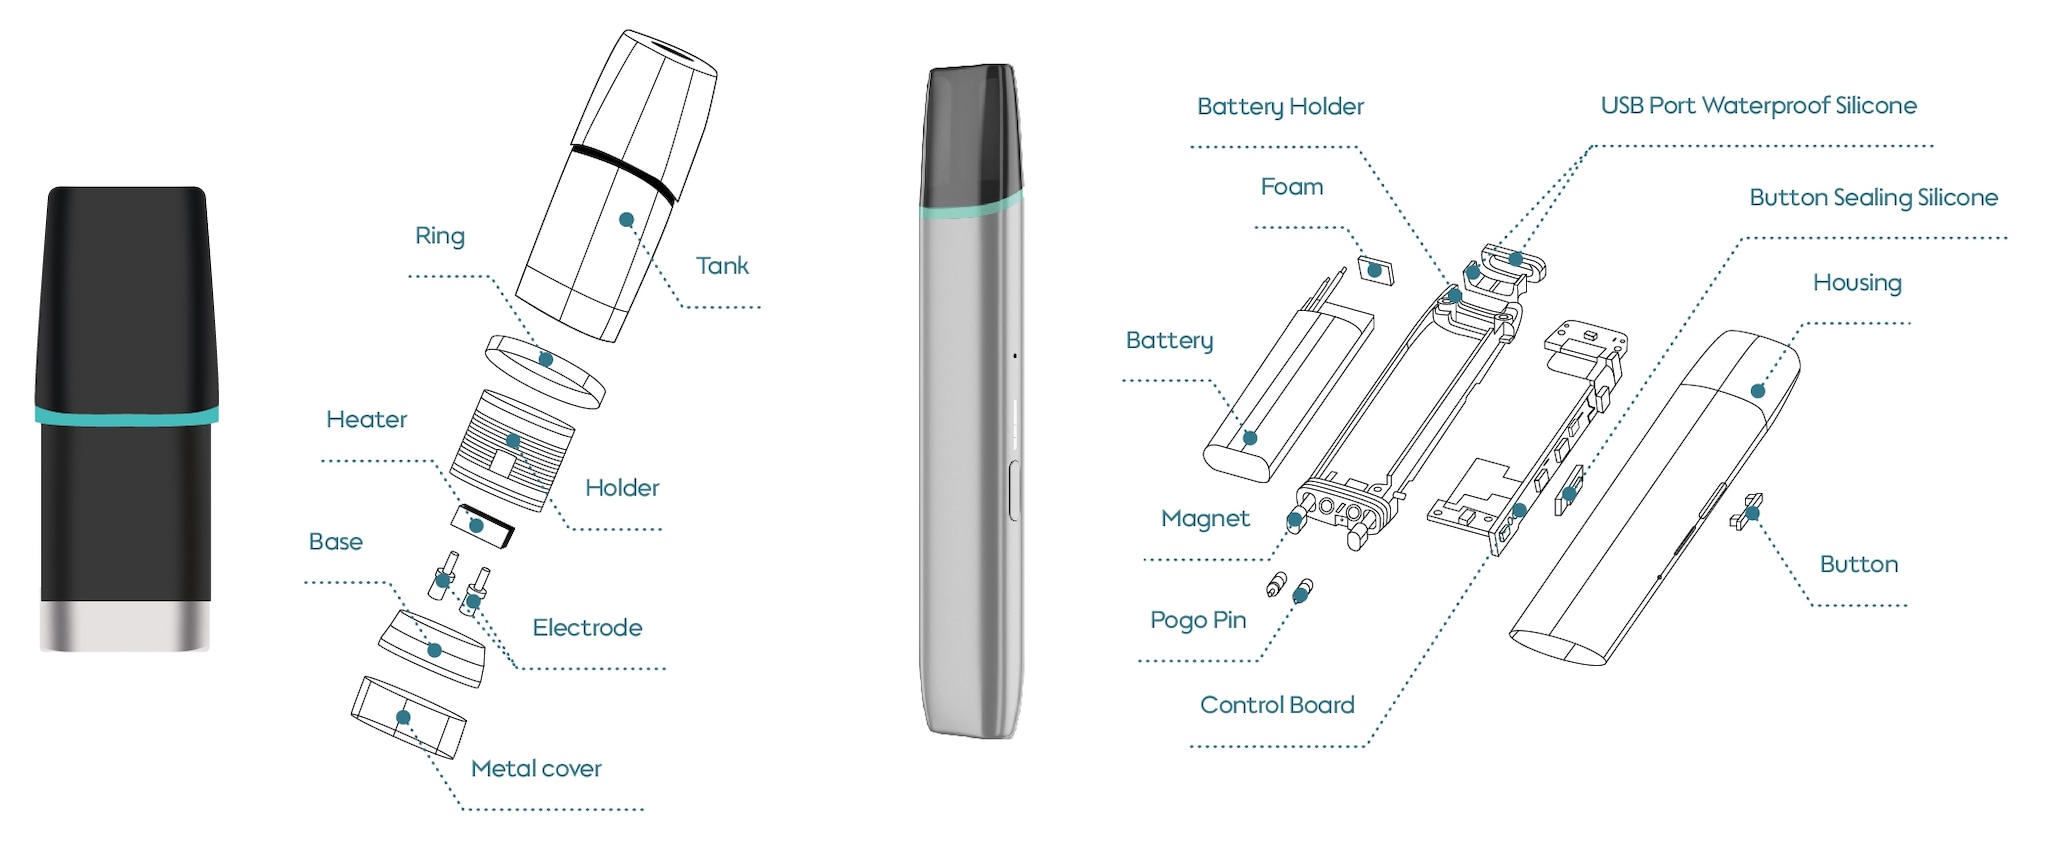 Ceramic Tipped Tweezers Are Widely Used For E-cigarette Industry